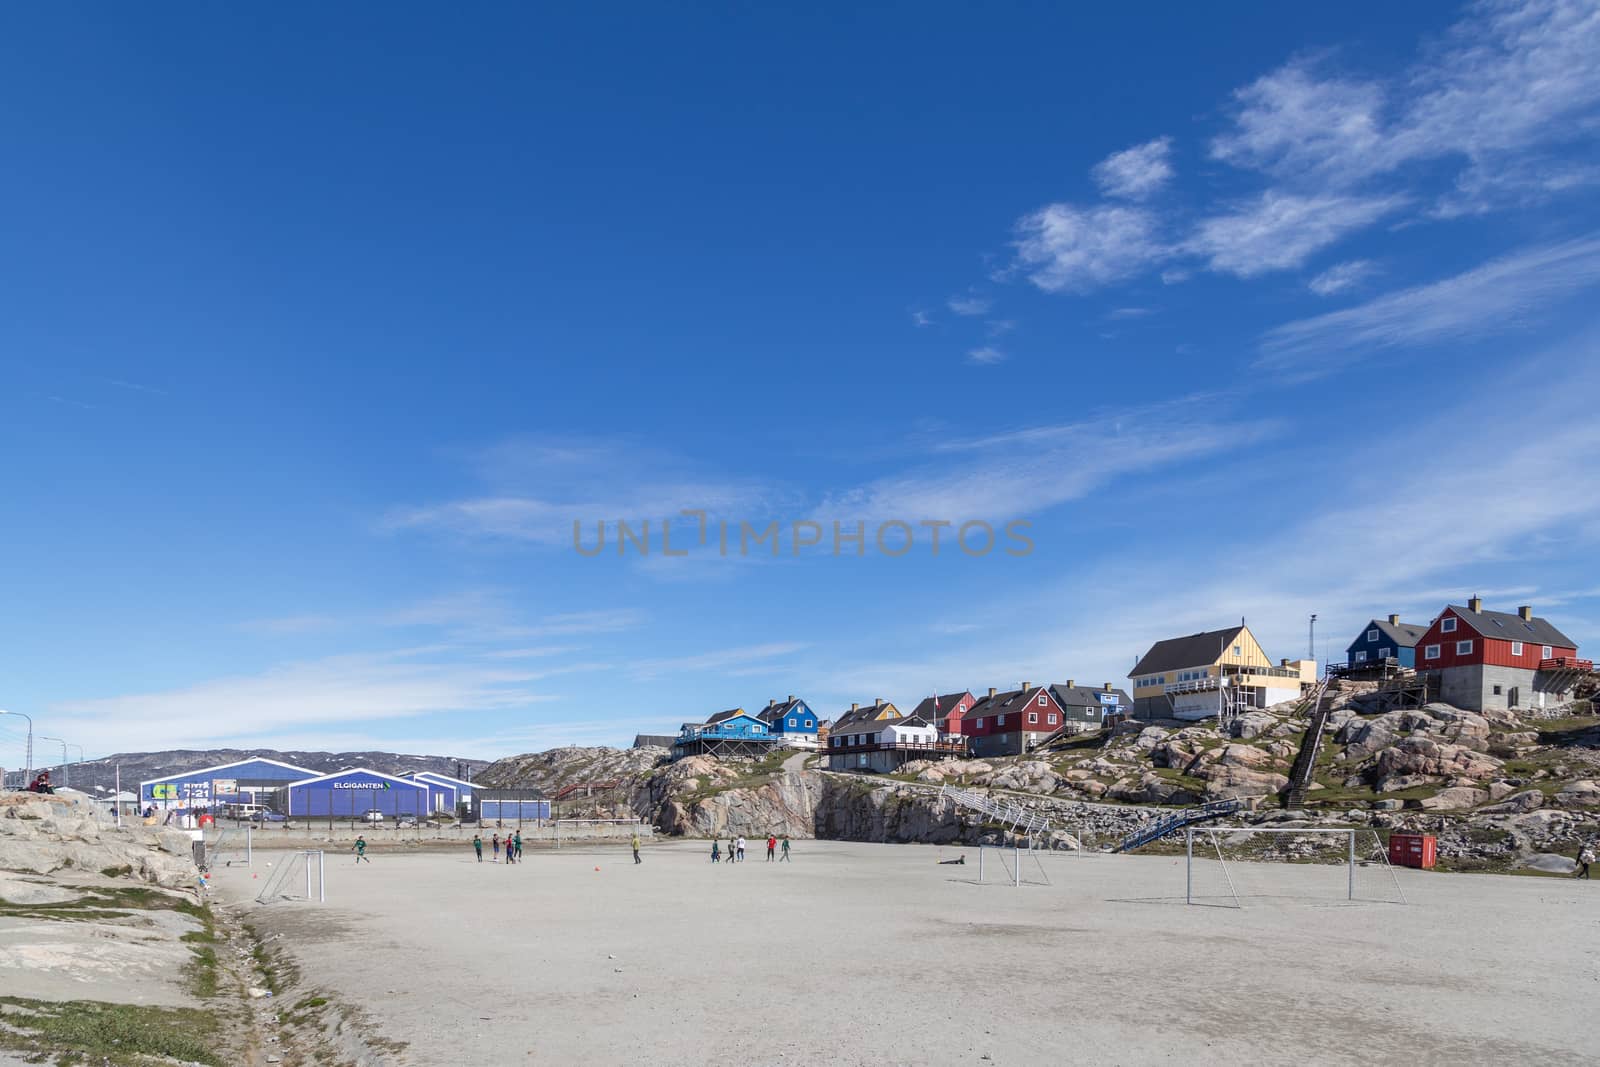 Ilulissat, Greenland - June 30, 2018: People playing soccer on the soccer field